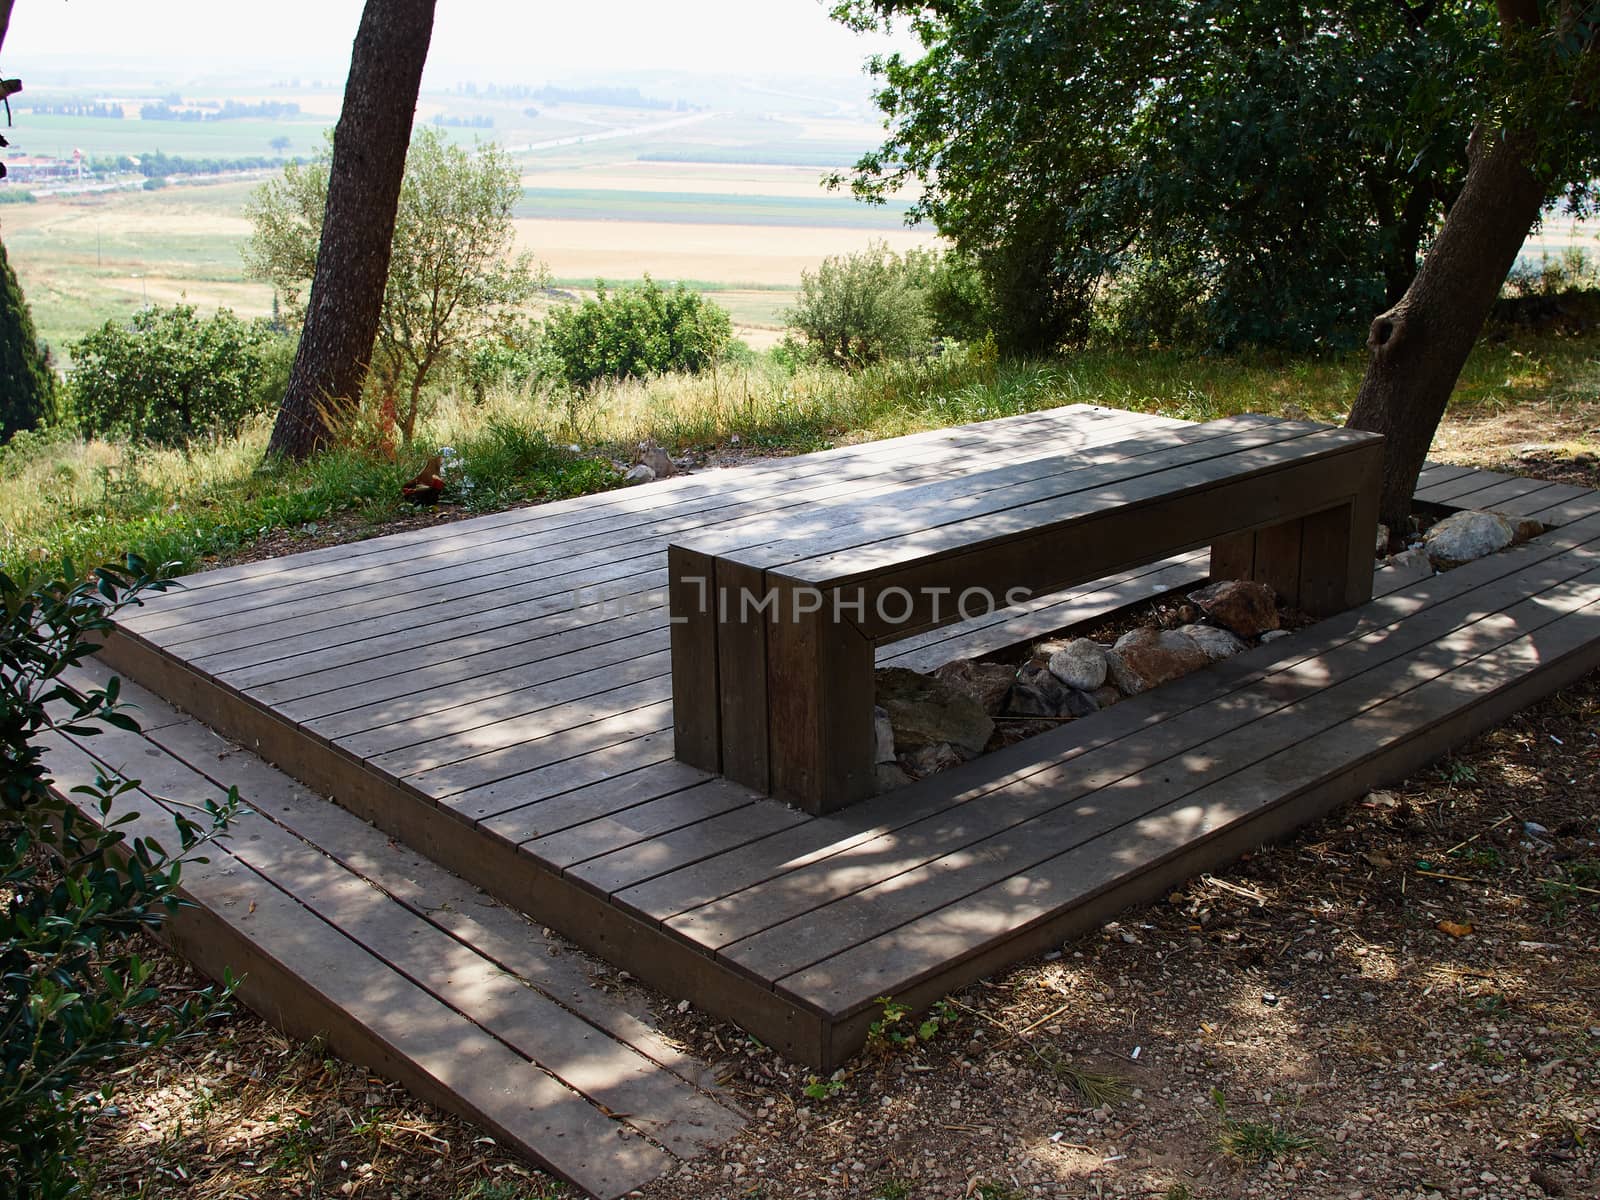 Modern design bench made of wood in a park overlooking beautiful landscape